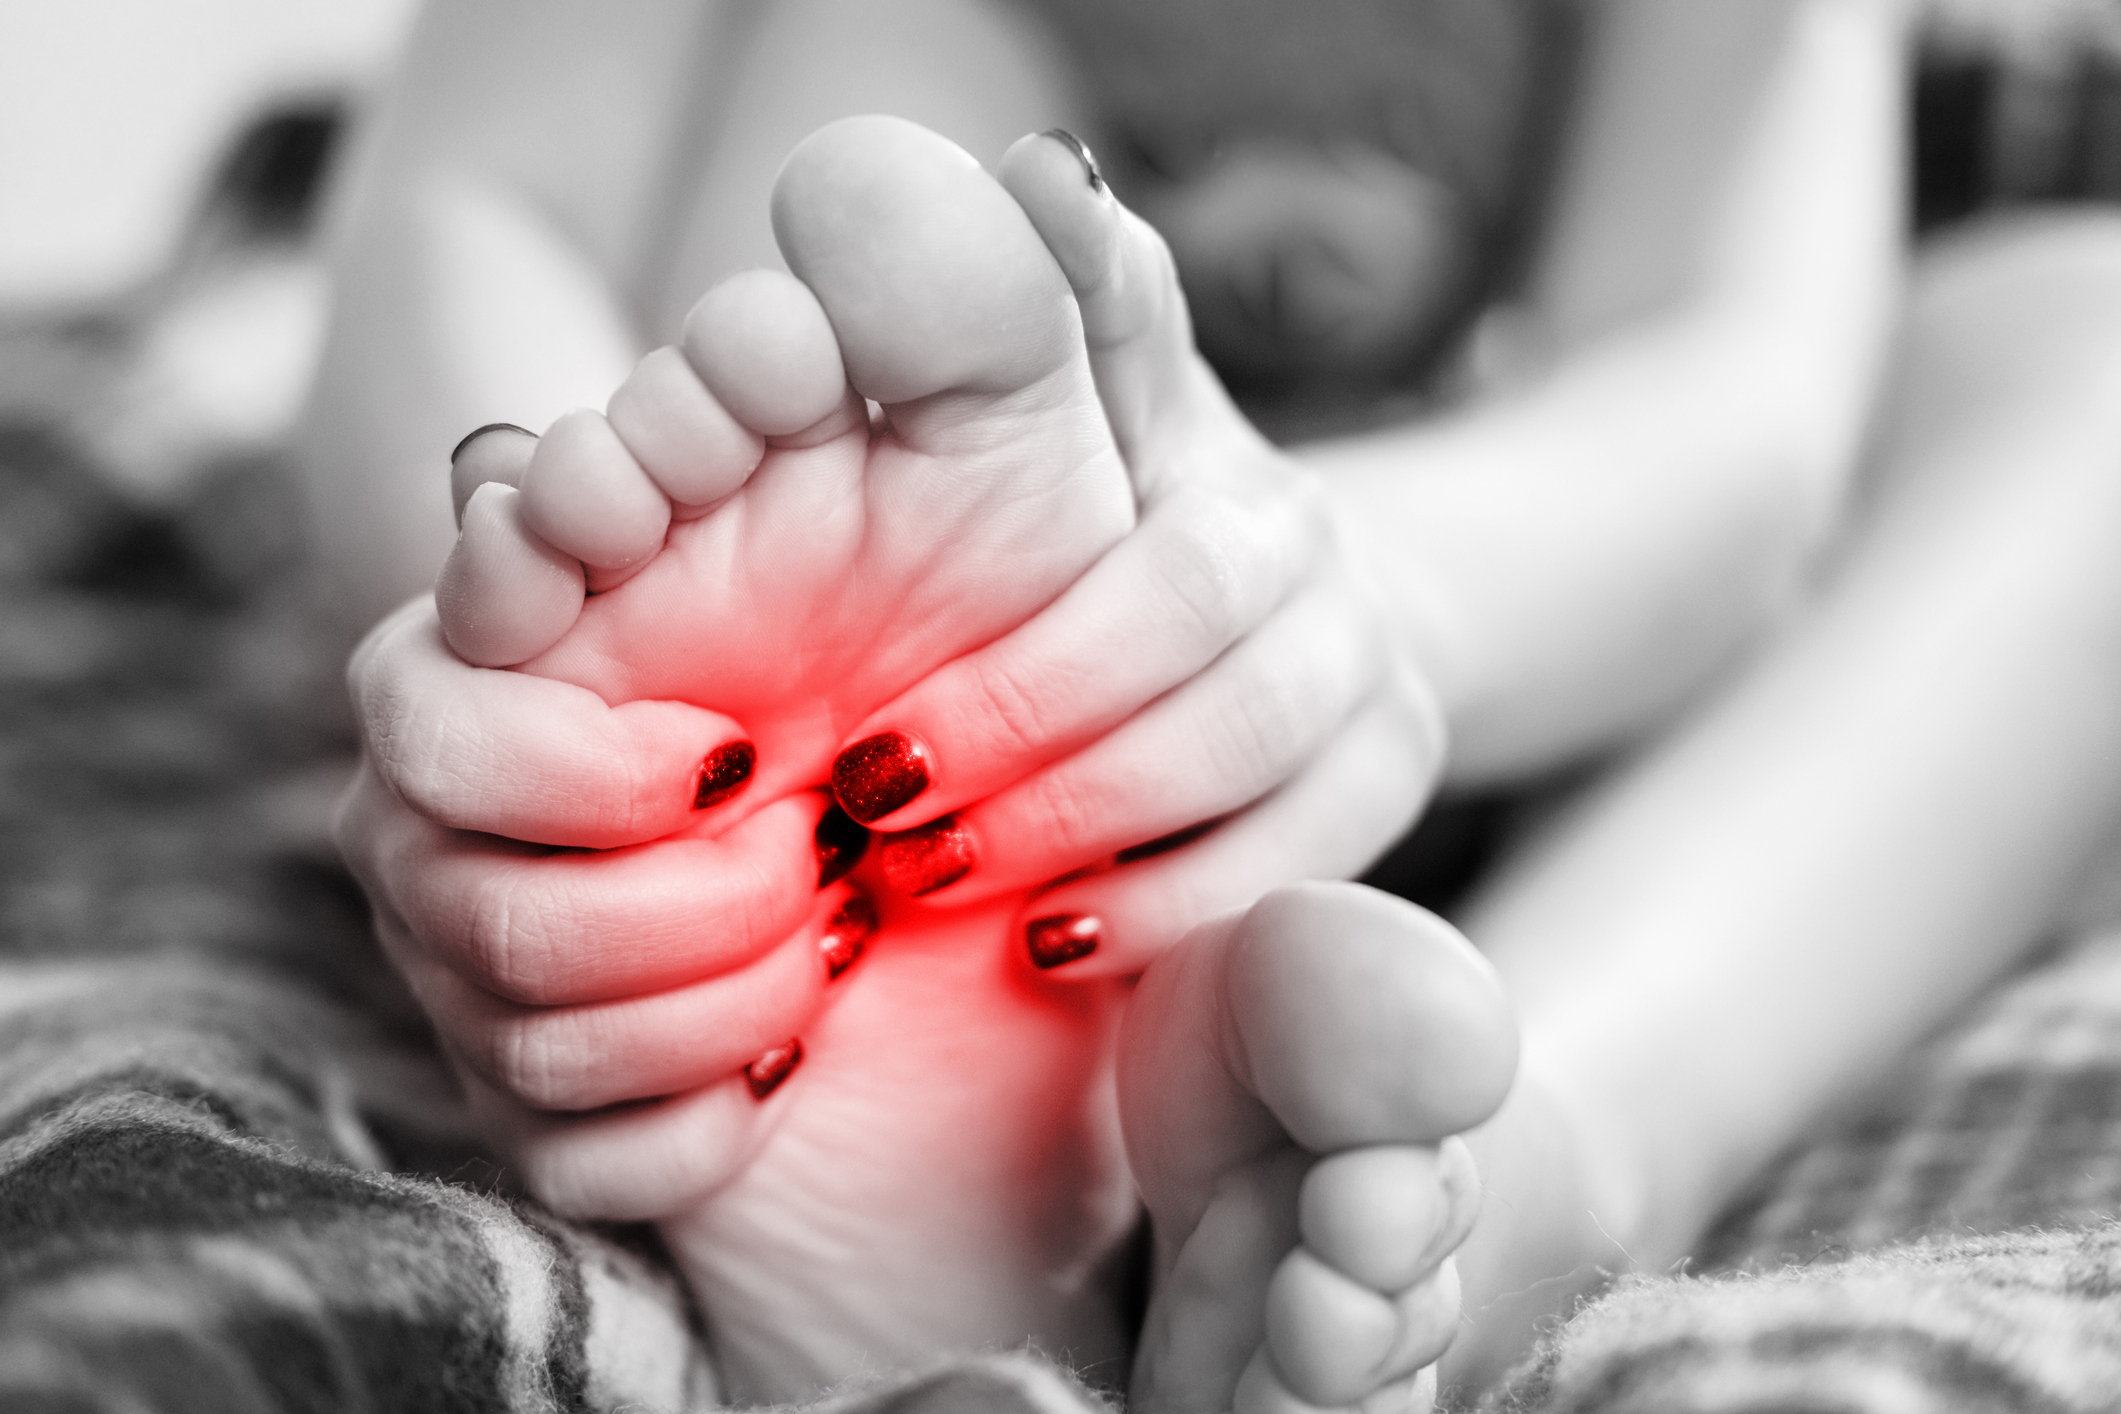 Neuropathic pain symptoms continue to be underestimated: an early diagnosis is important to maximise treatment options and reduce the risk of unwanted complications | weirdkaya